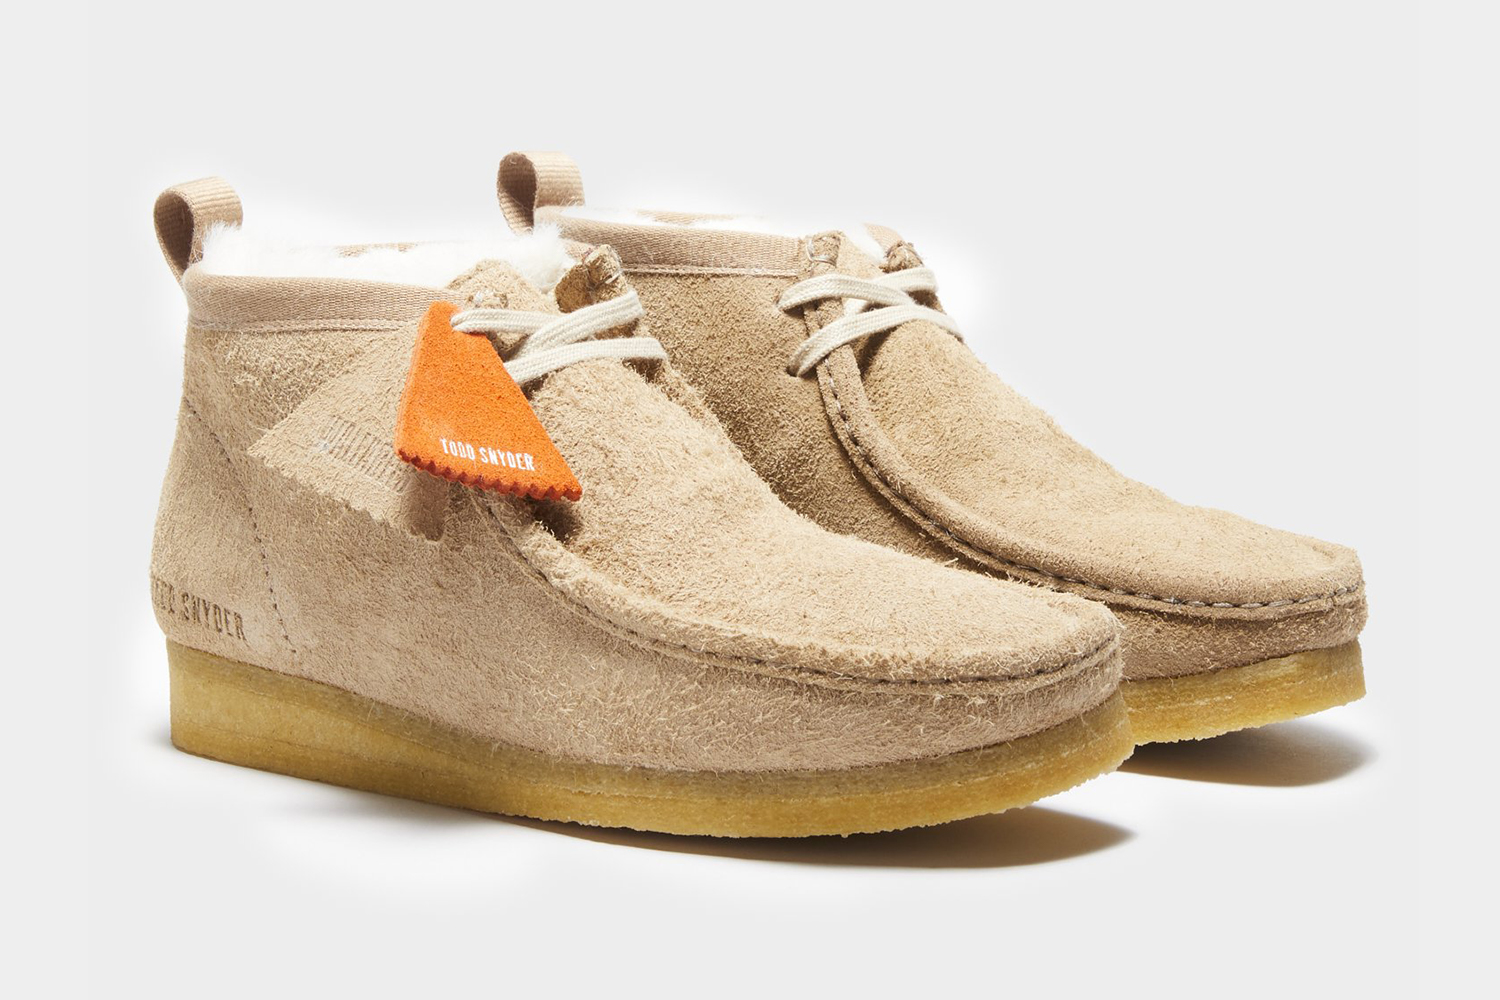 Todd Snyder x Clarks Shearling Wallabee in Brown